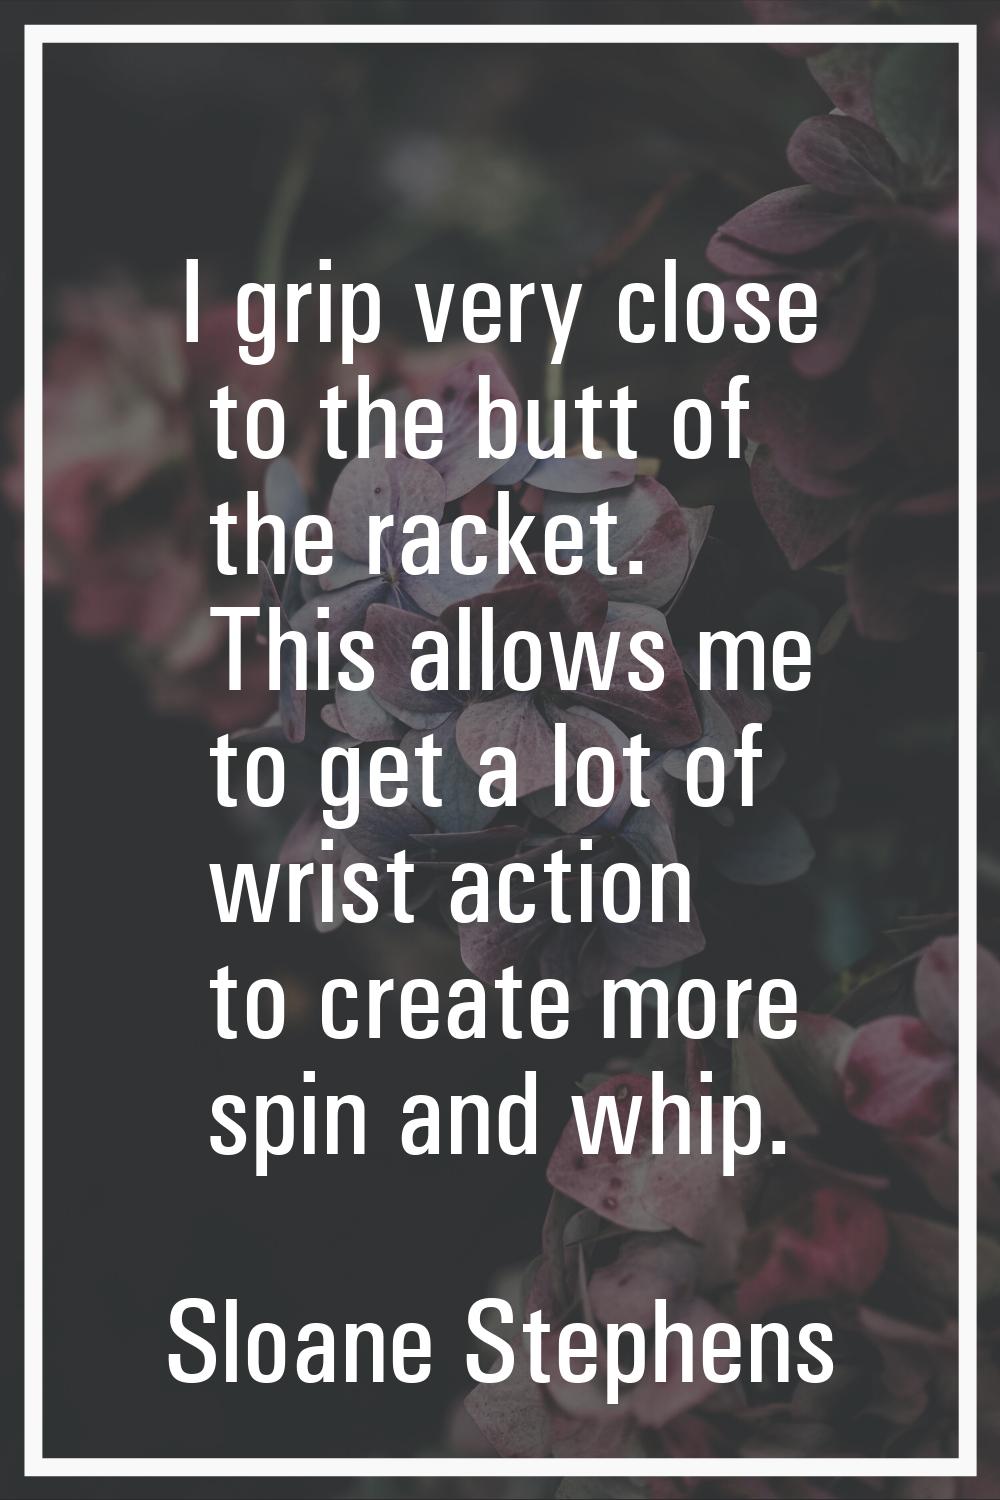 I grip very close to the butt of the racket. This allows me to get a lot of wrist action to create 